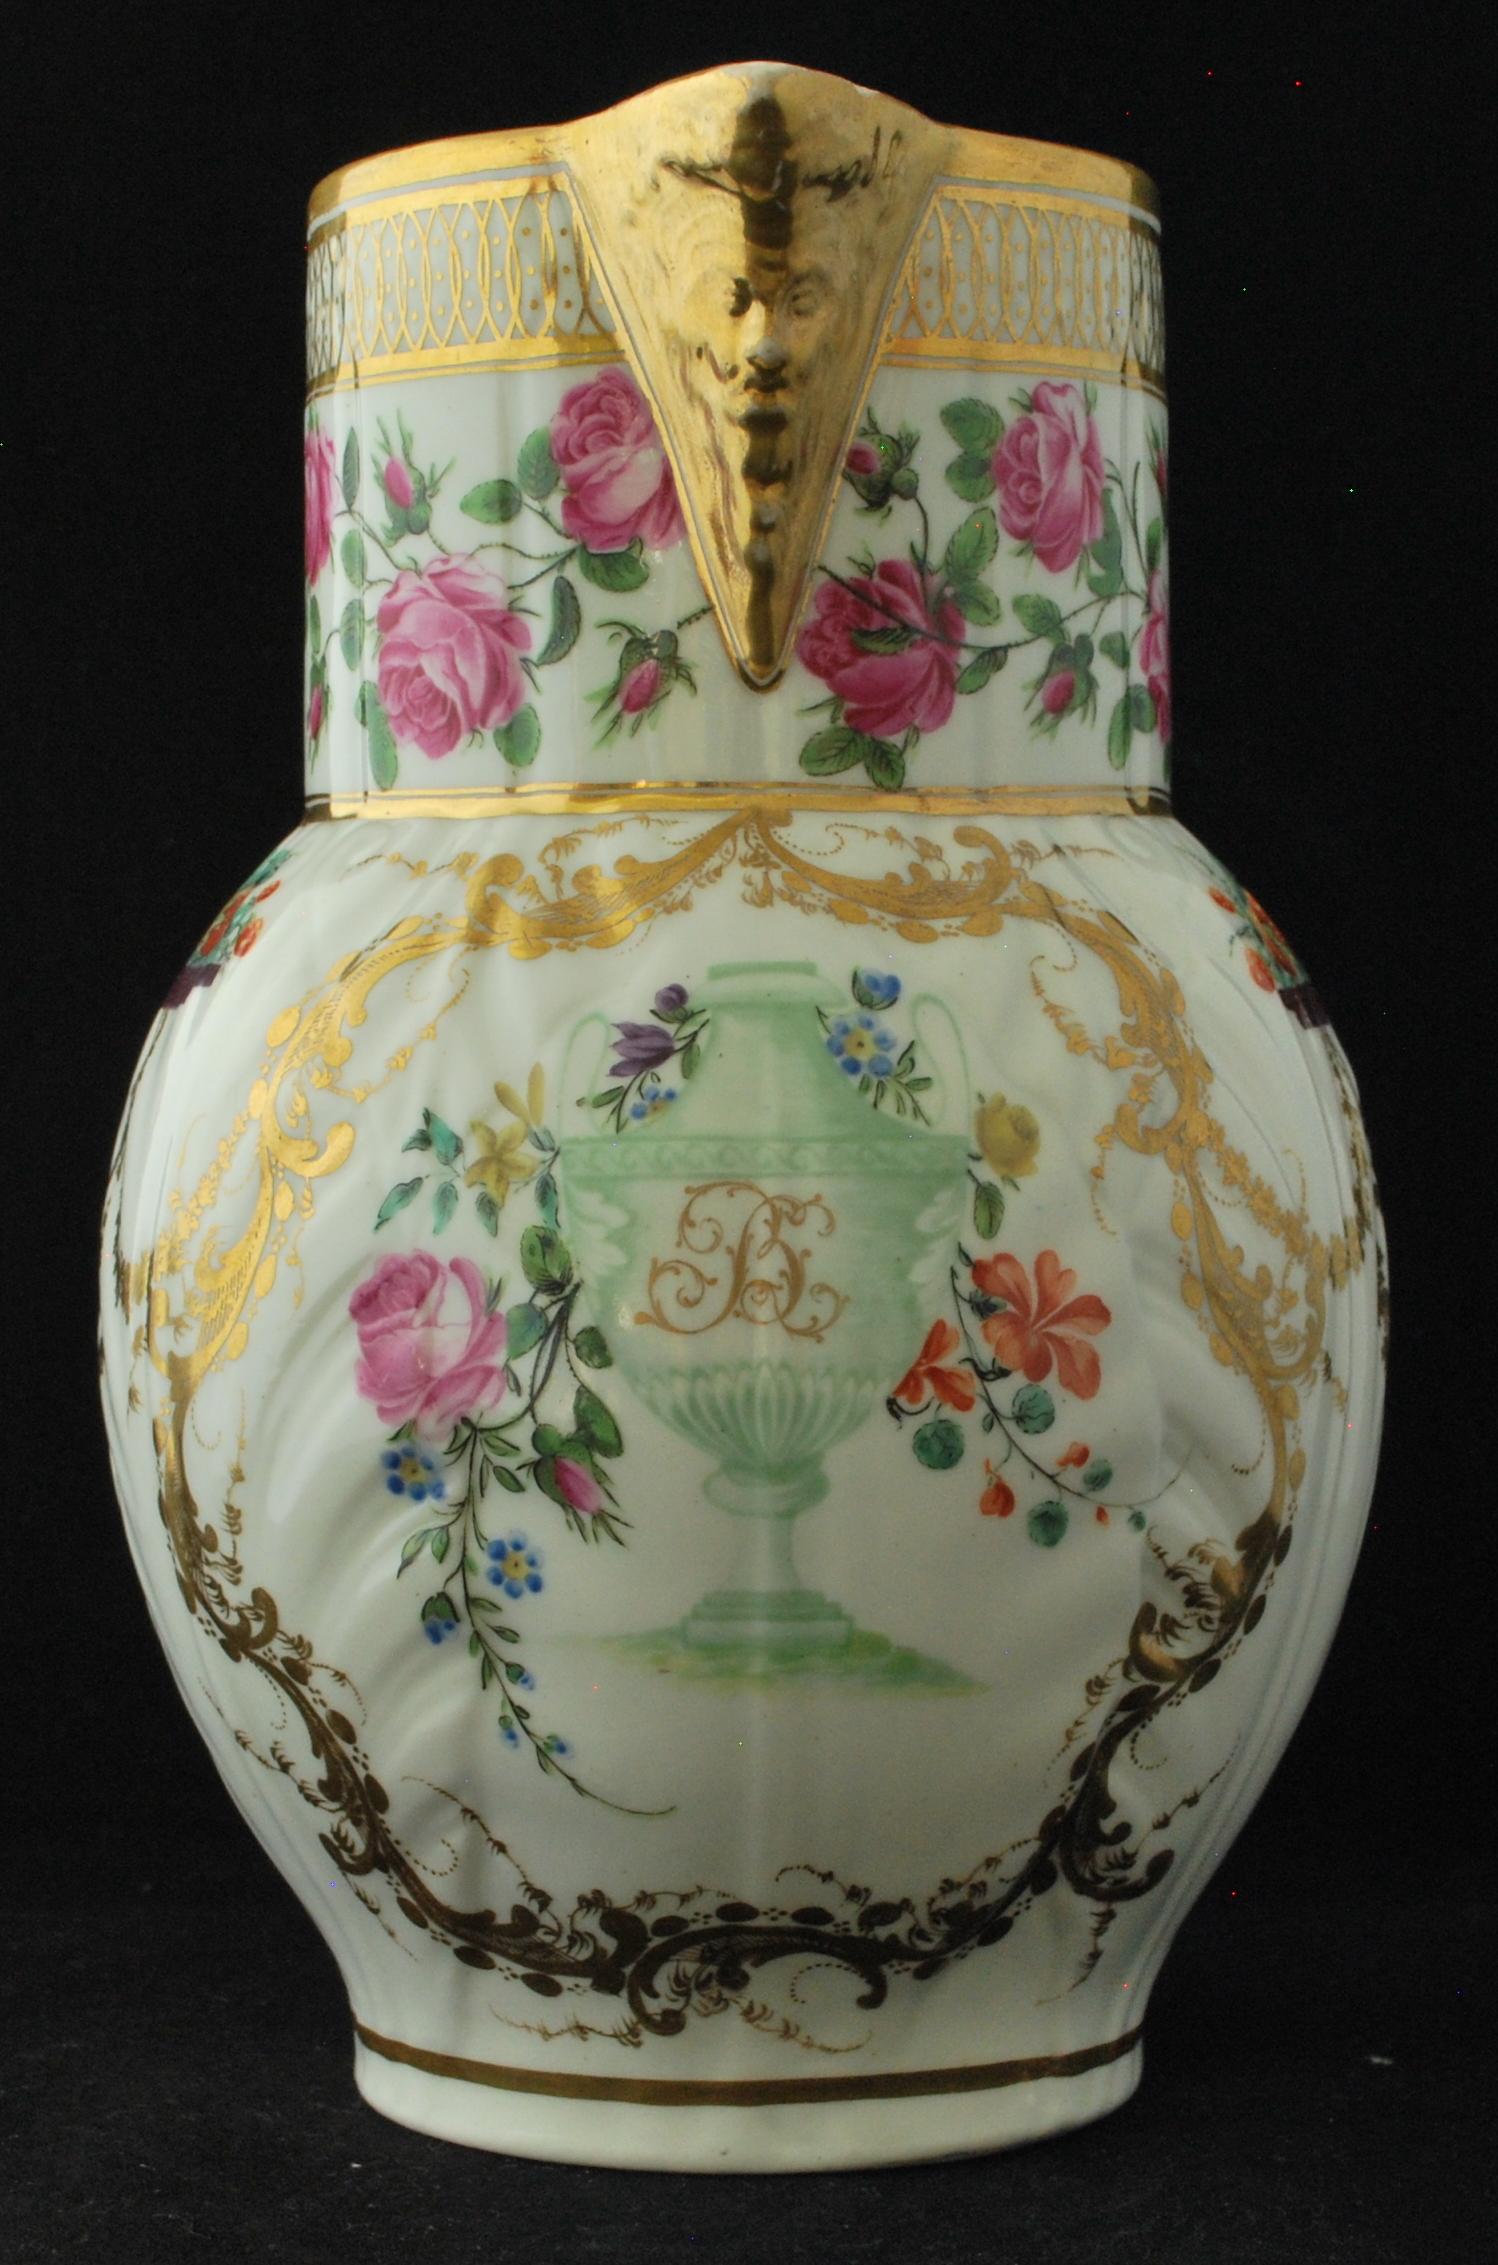 A Caughley cabbage jug with mask spout; decorated by Chamberlain Worcester with fine polychrome decoration and gilt intertwined initials. The decoration is particularly fine.